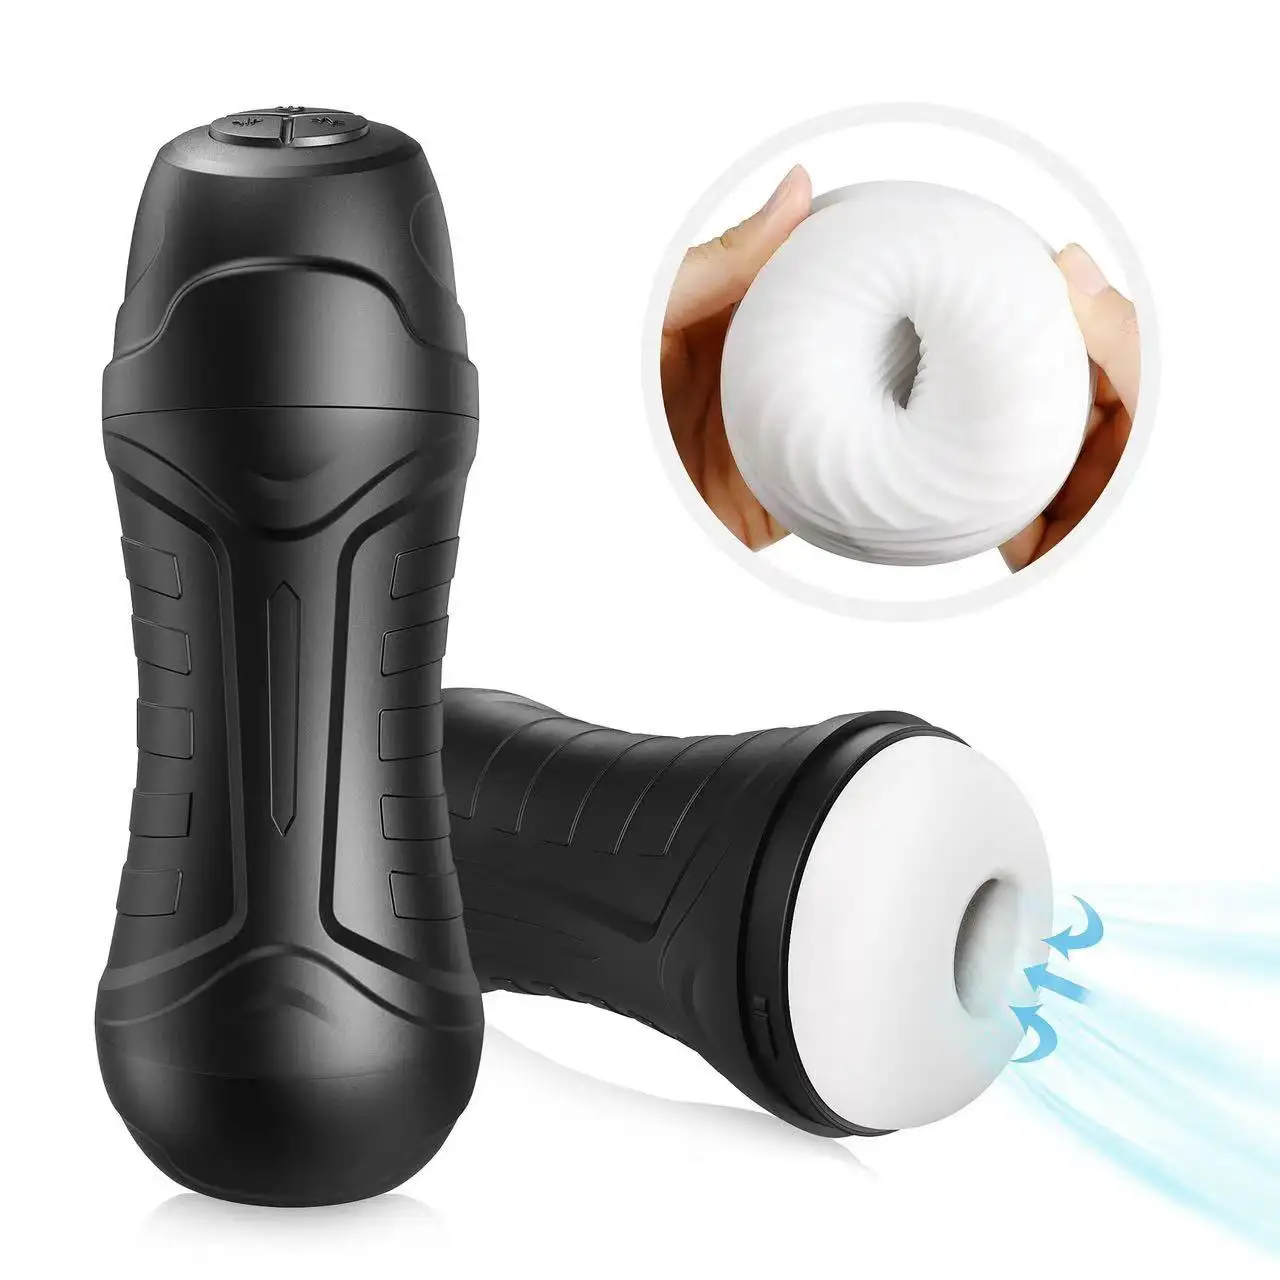 Mr.Shen Masturbation device Sucking Automatic Pump vacuum suction cup exercise 3 Suction men's airplane cup